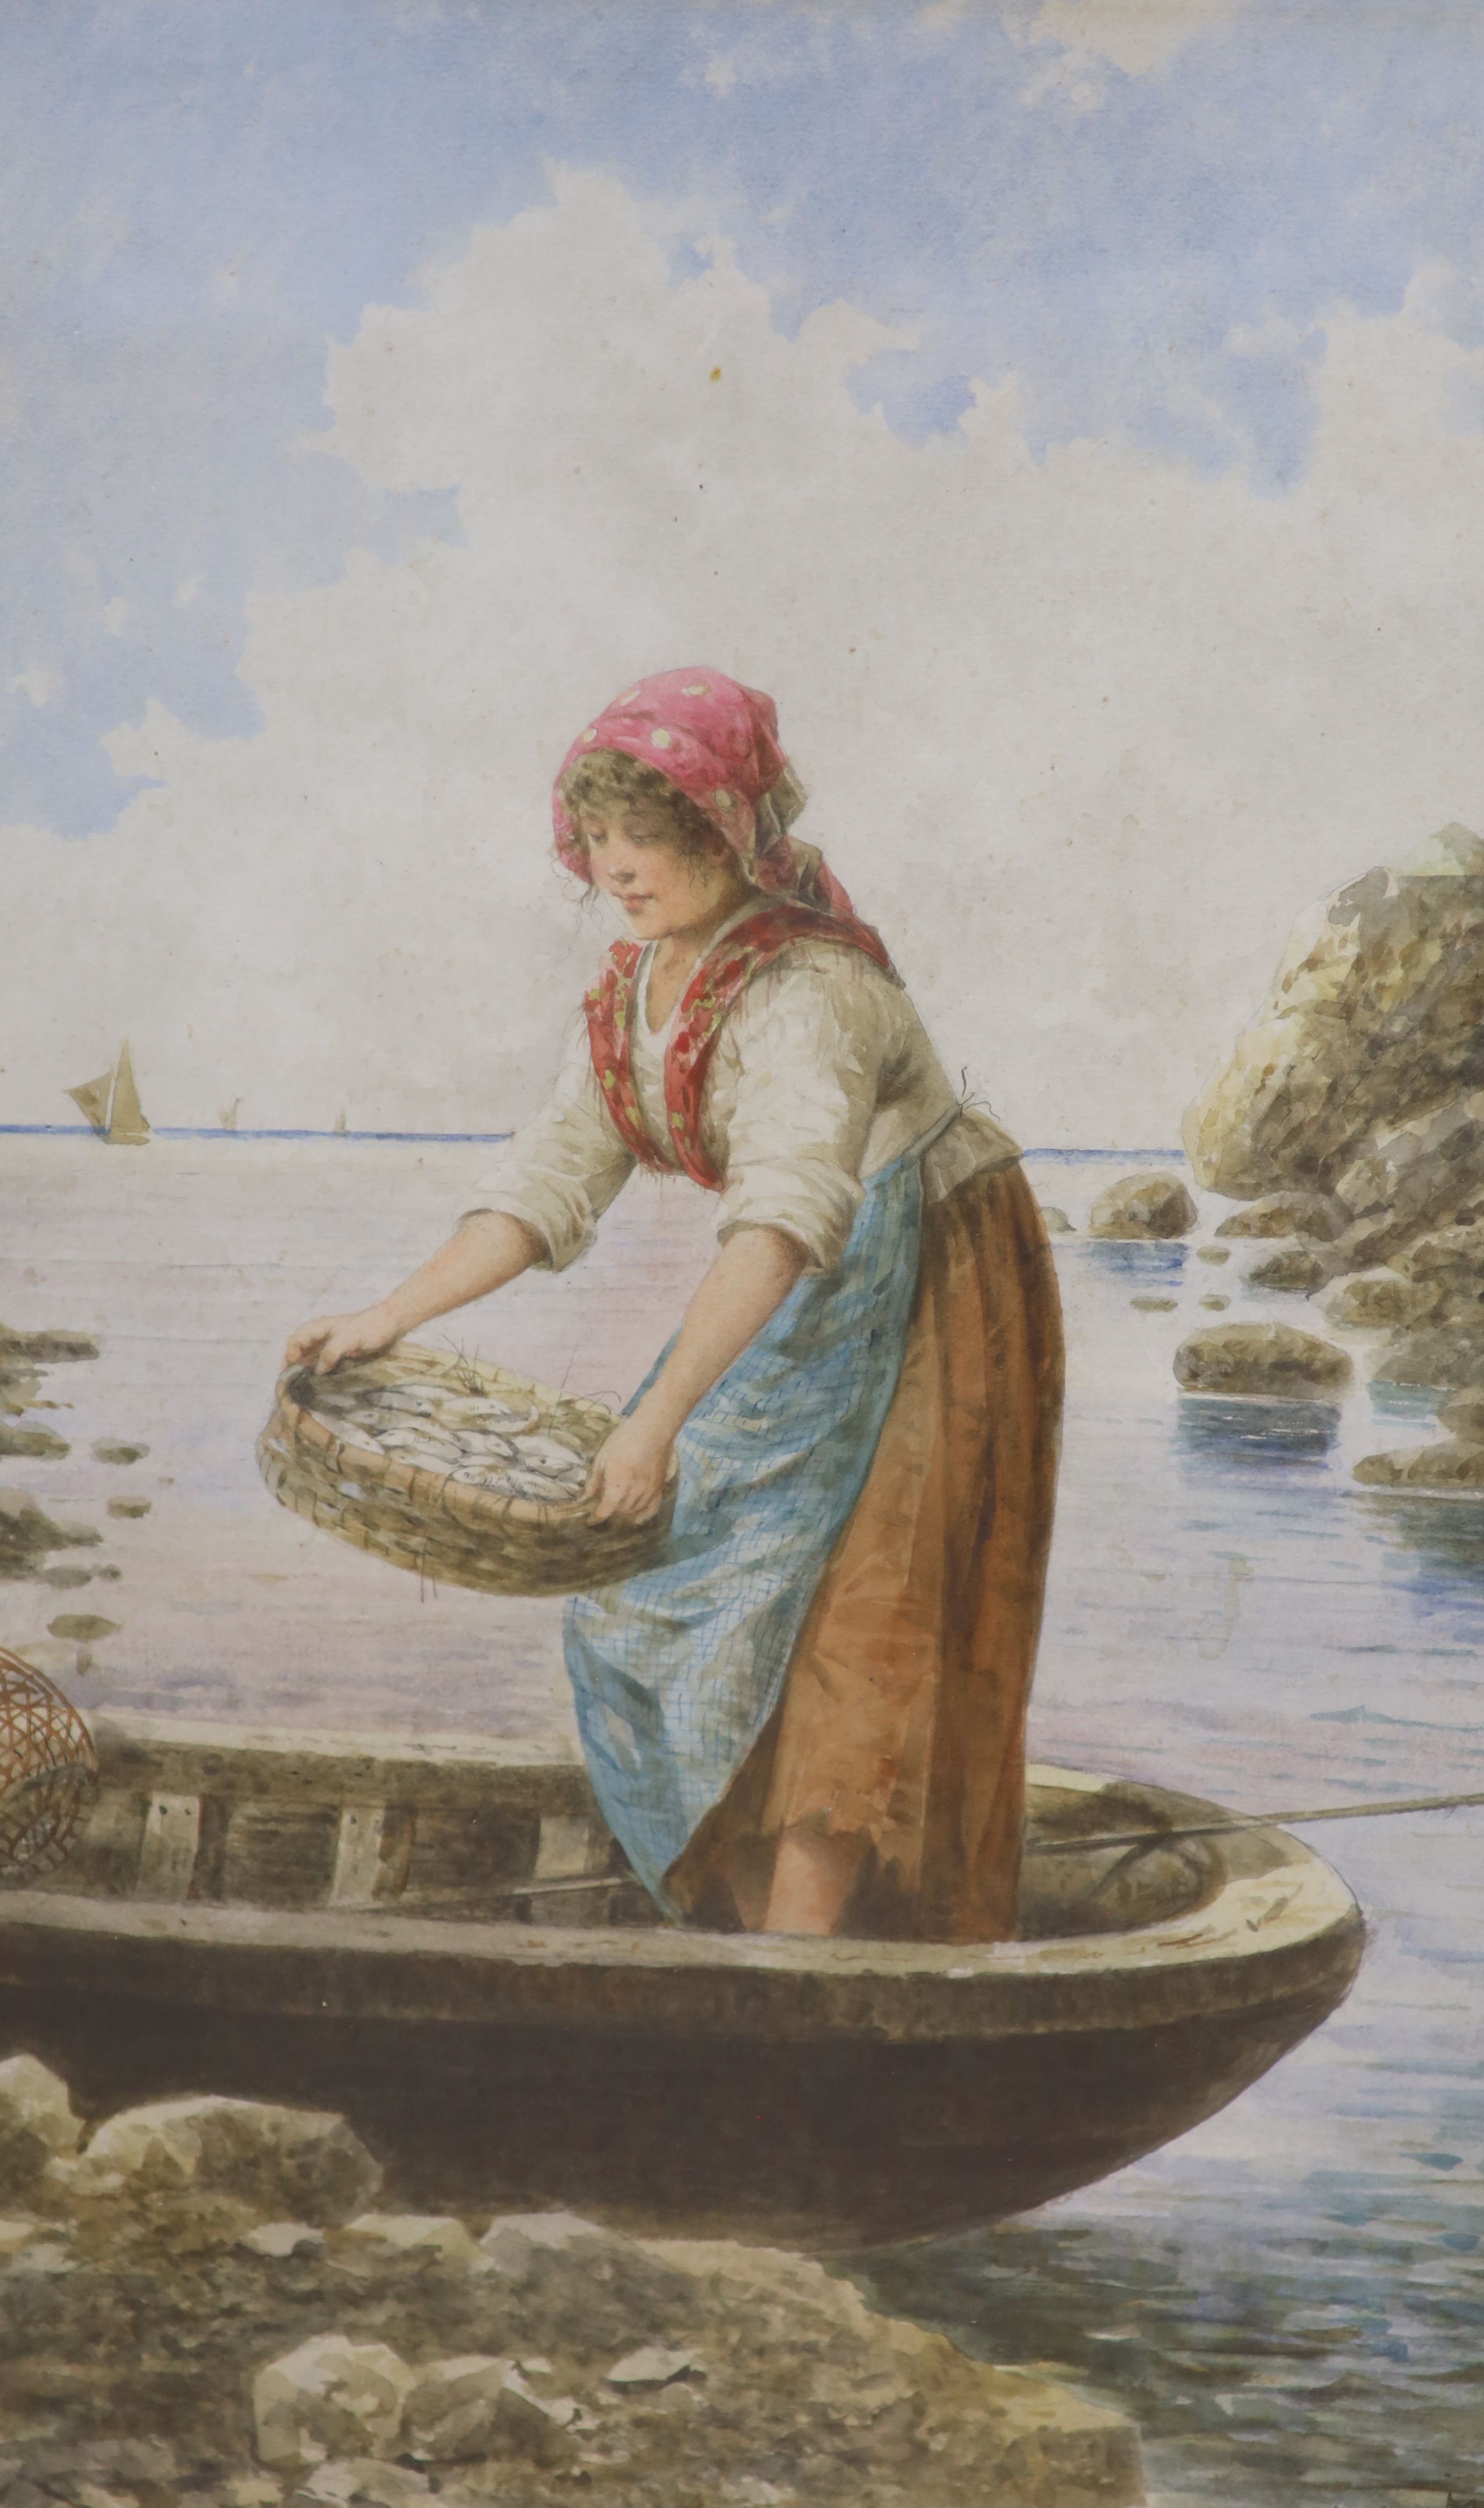 D. Lari (Italian, 19th century), Young fisherwoman with her catch, indistinctly signed, watercolour, 47.5 x 29.5cm